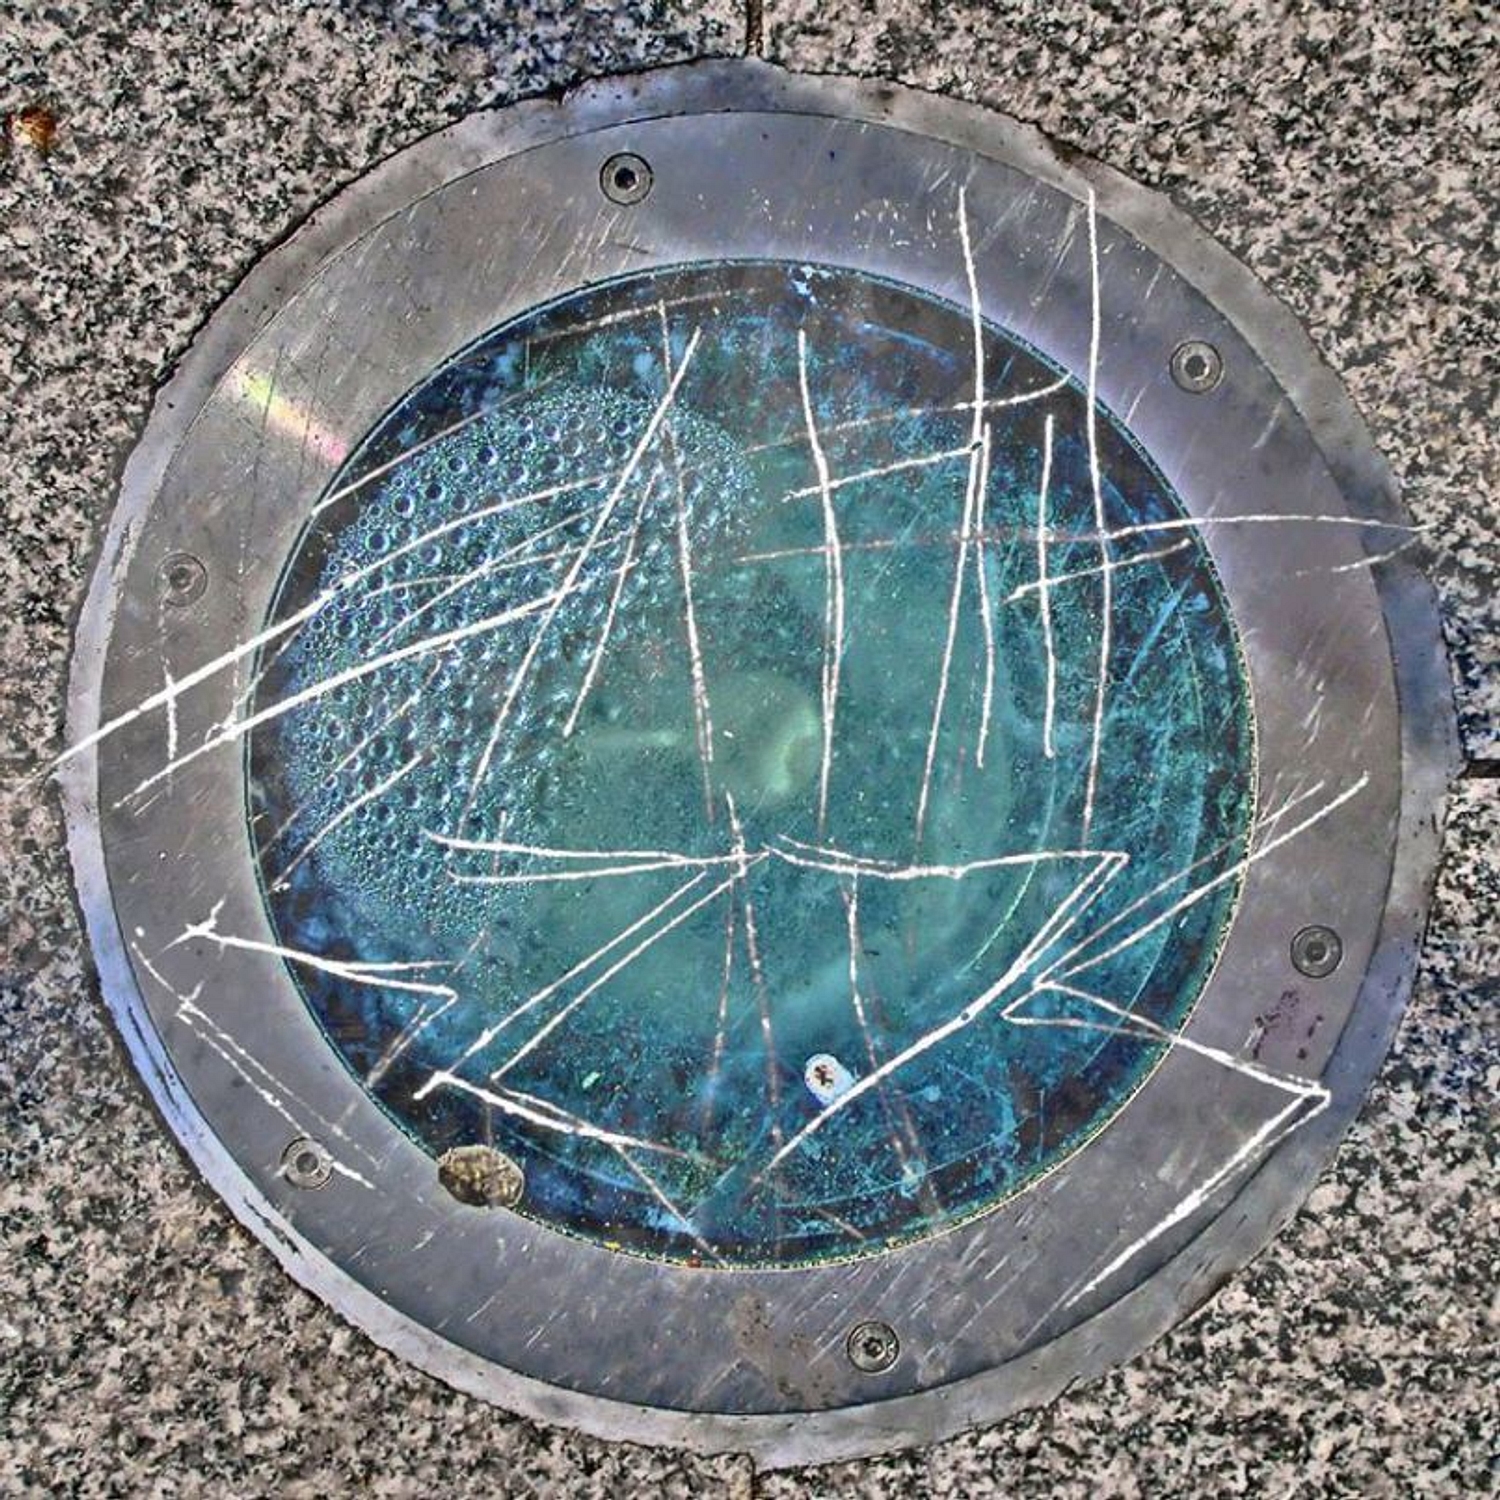 Death Grips announce details of final album, ‘the powers that b’